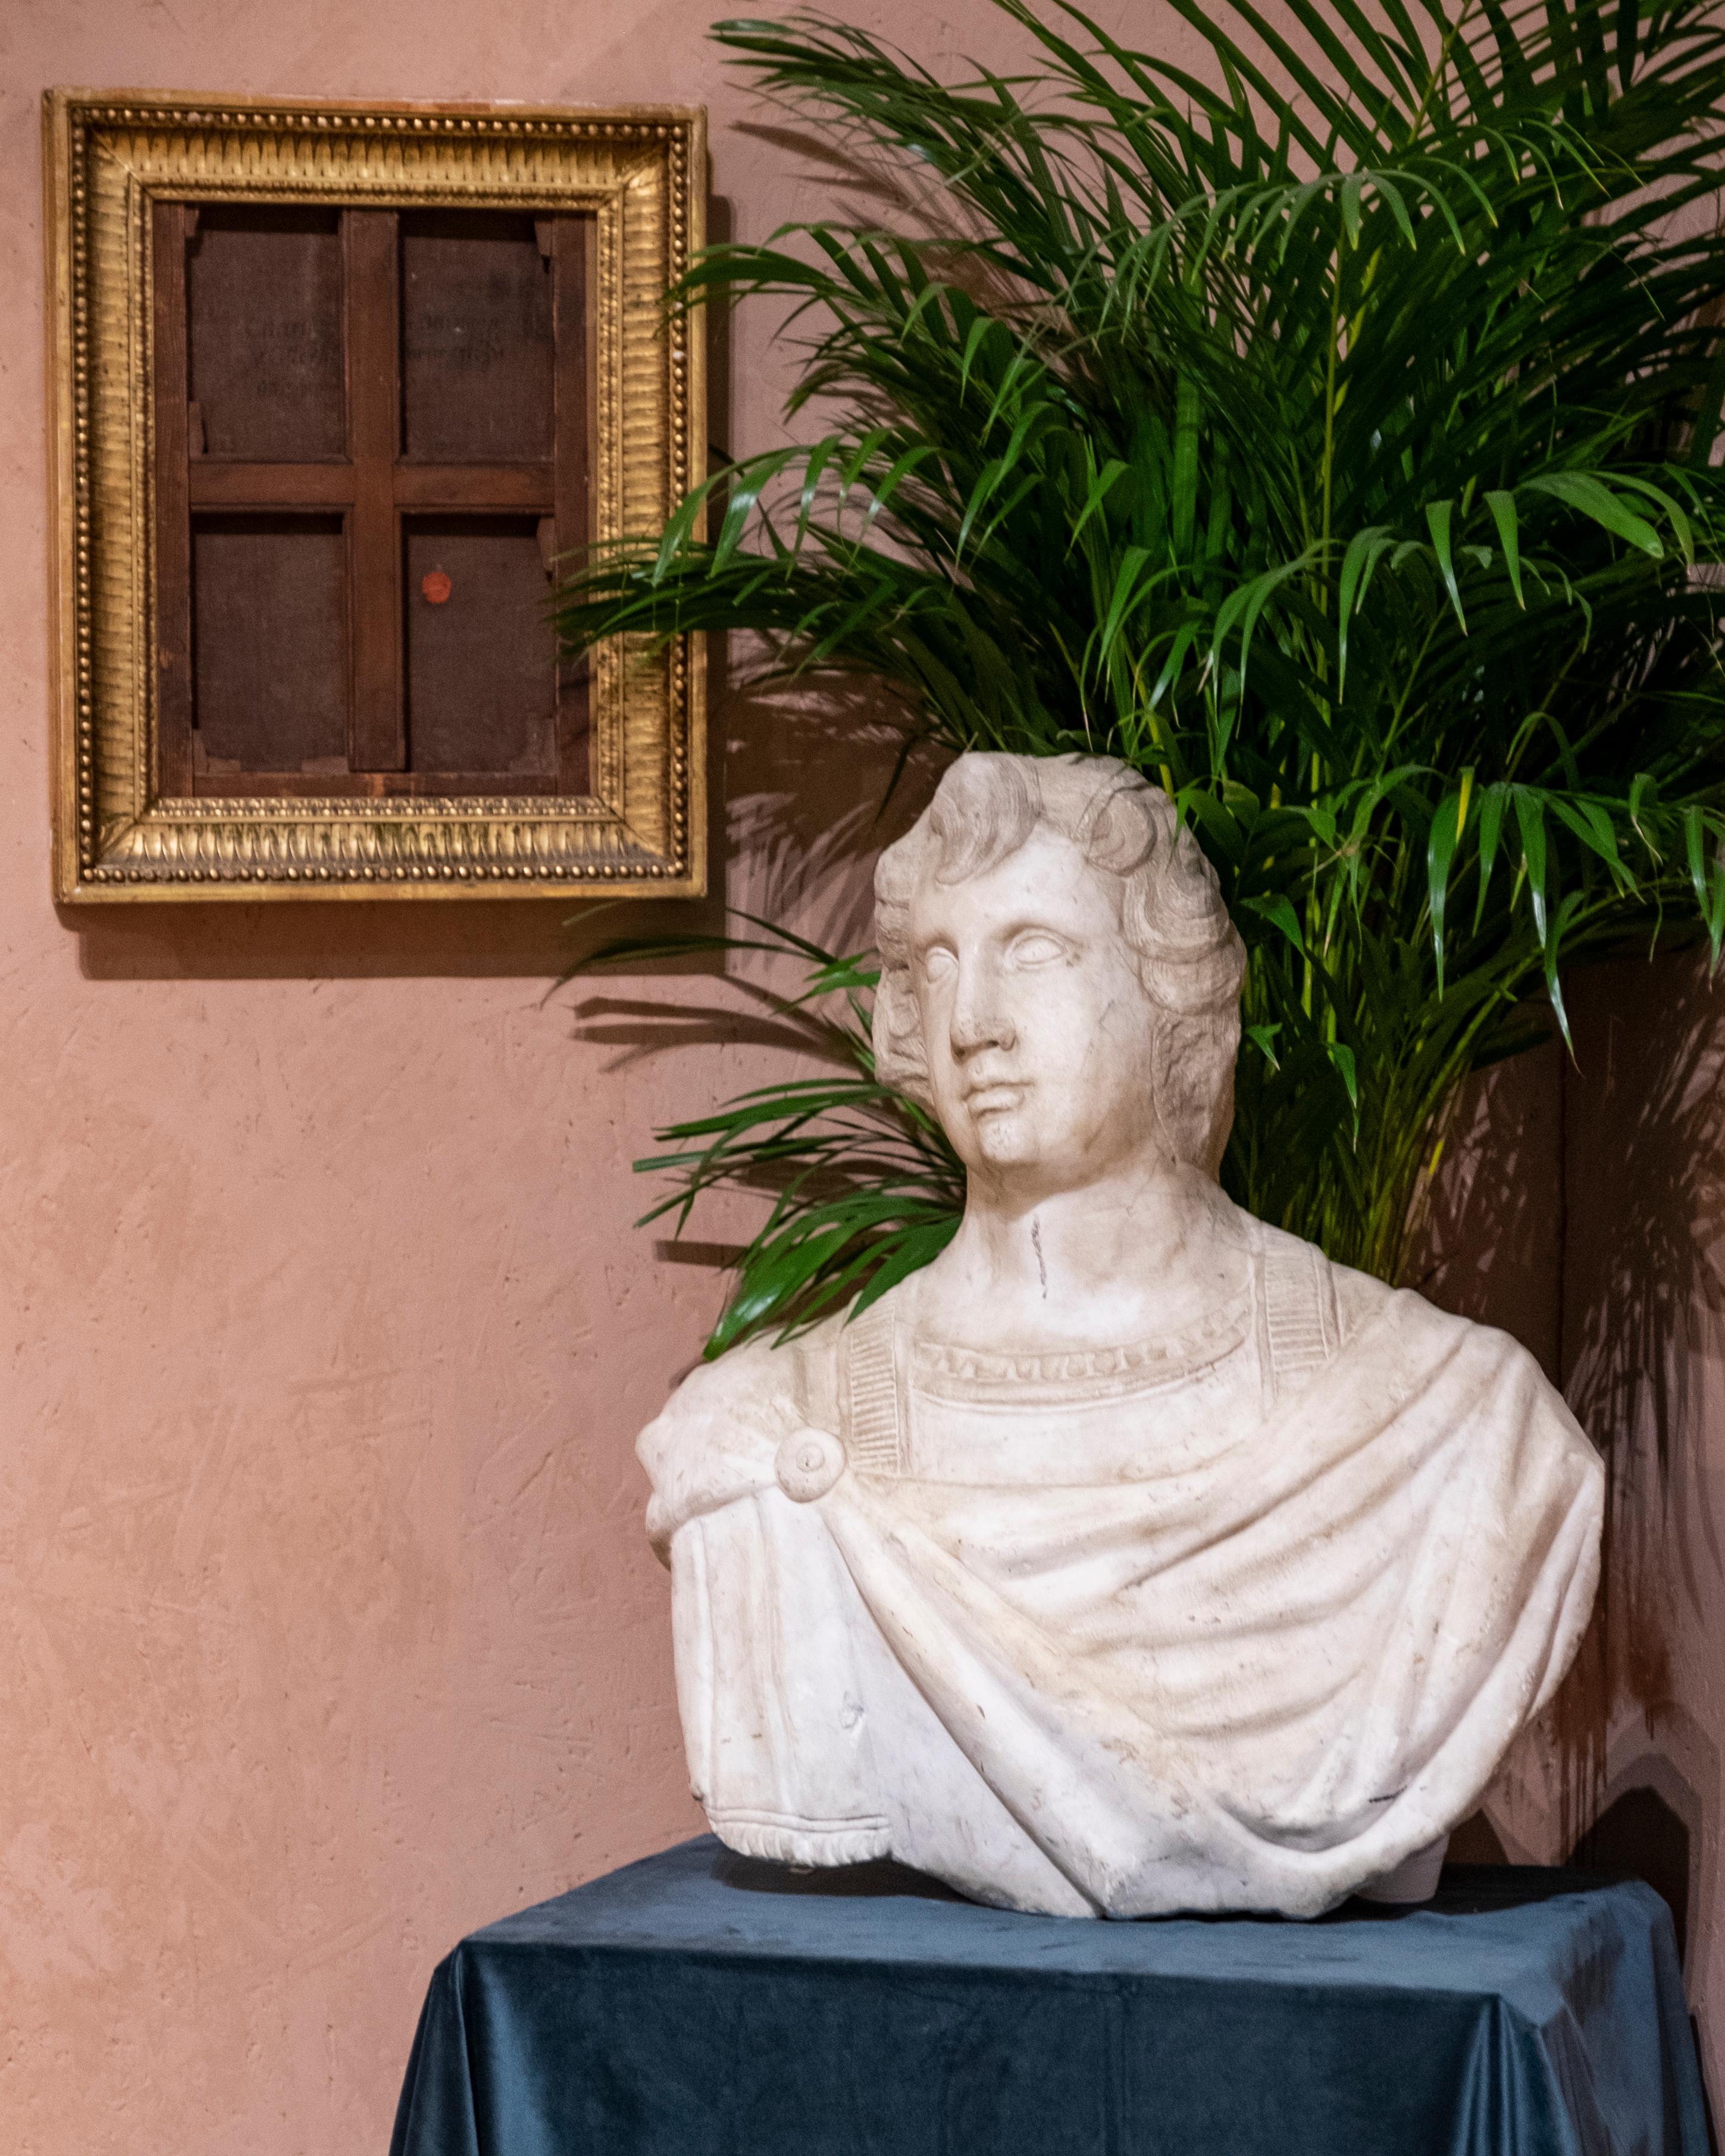 Impressive early 18th century hand carved life-size marble bust of a Roman man, circa 1700 Italy, possibly older. 

Condition is good with minor chips and nicks consistent with age and use. A detailed condition report is available on request.